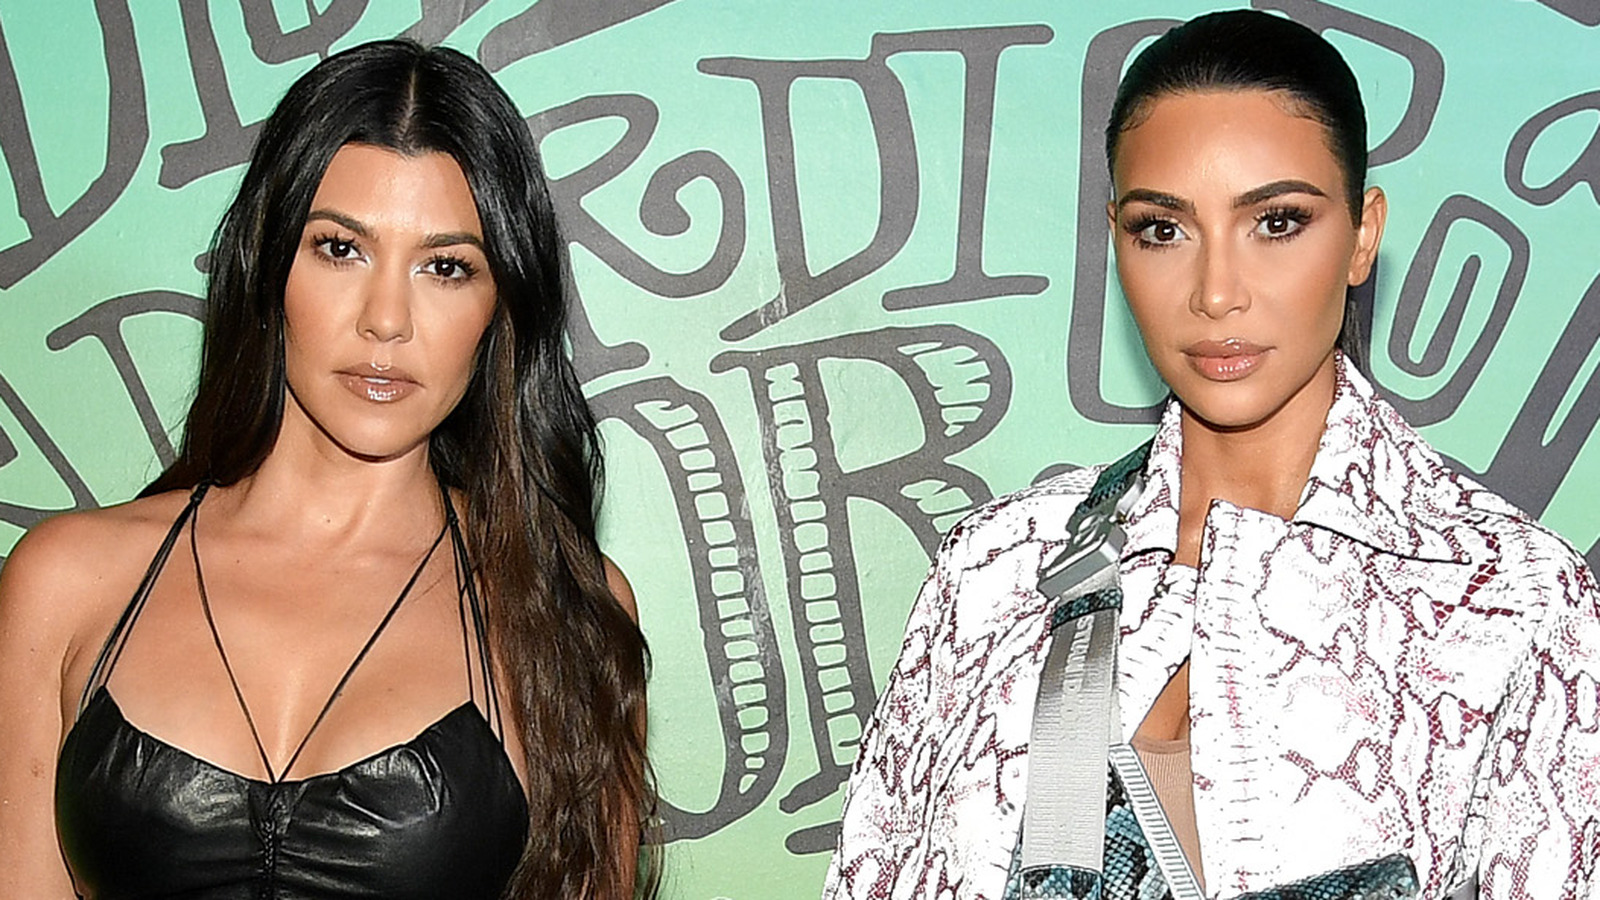 Kim Kardashian West and sister Kourtney step out in head-to-toe